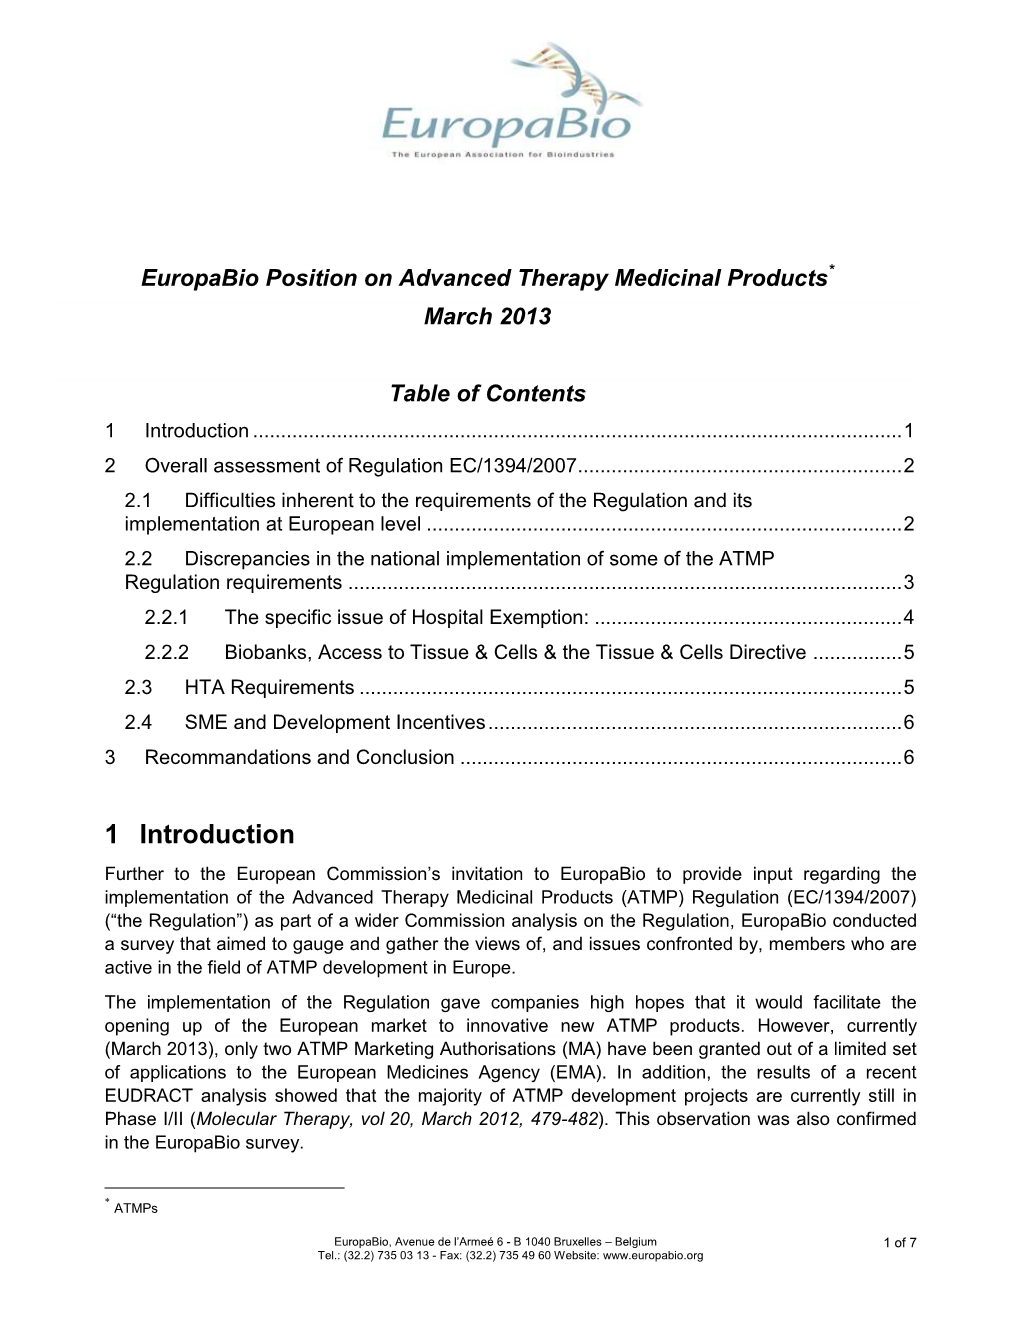 Europabio Position on Advanced Therapy Medicinal Products* March 2013